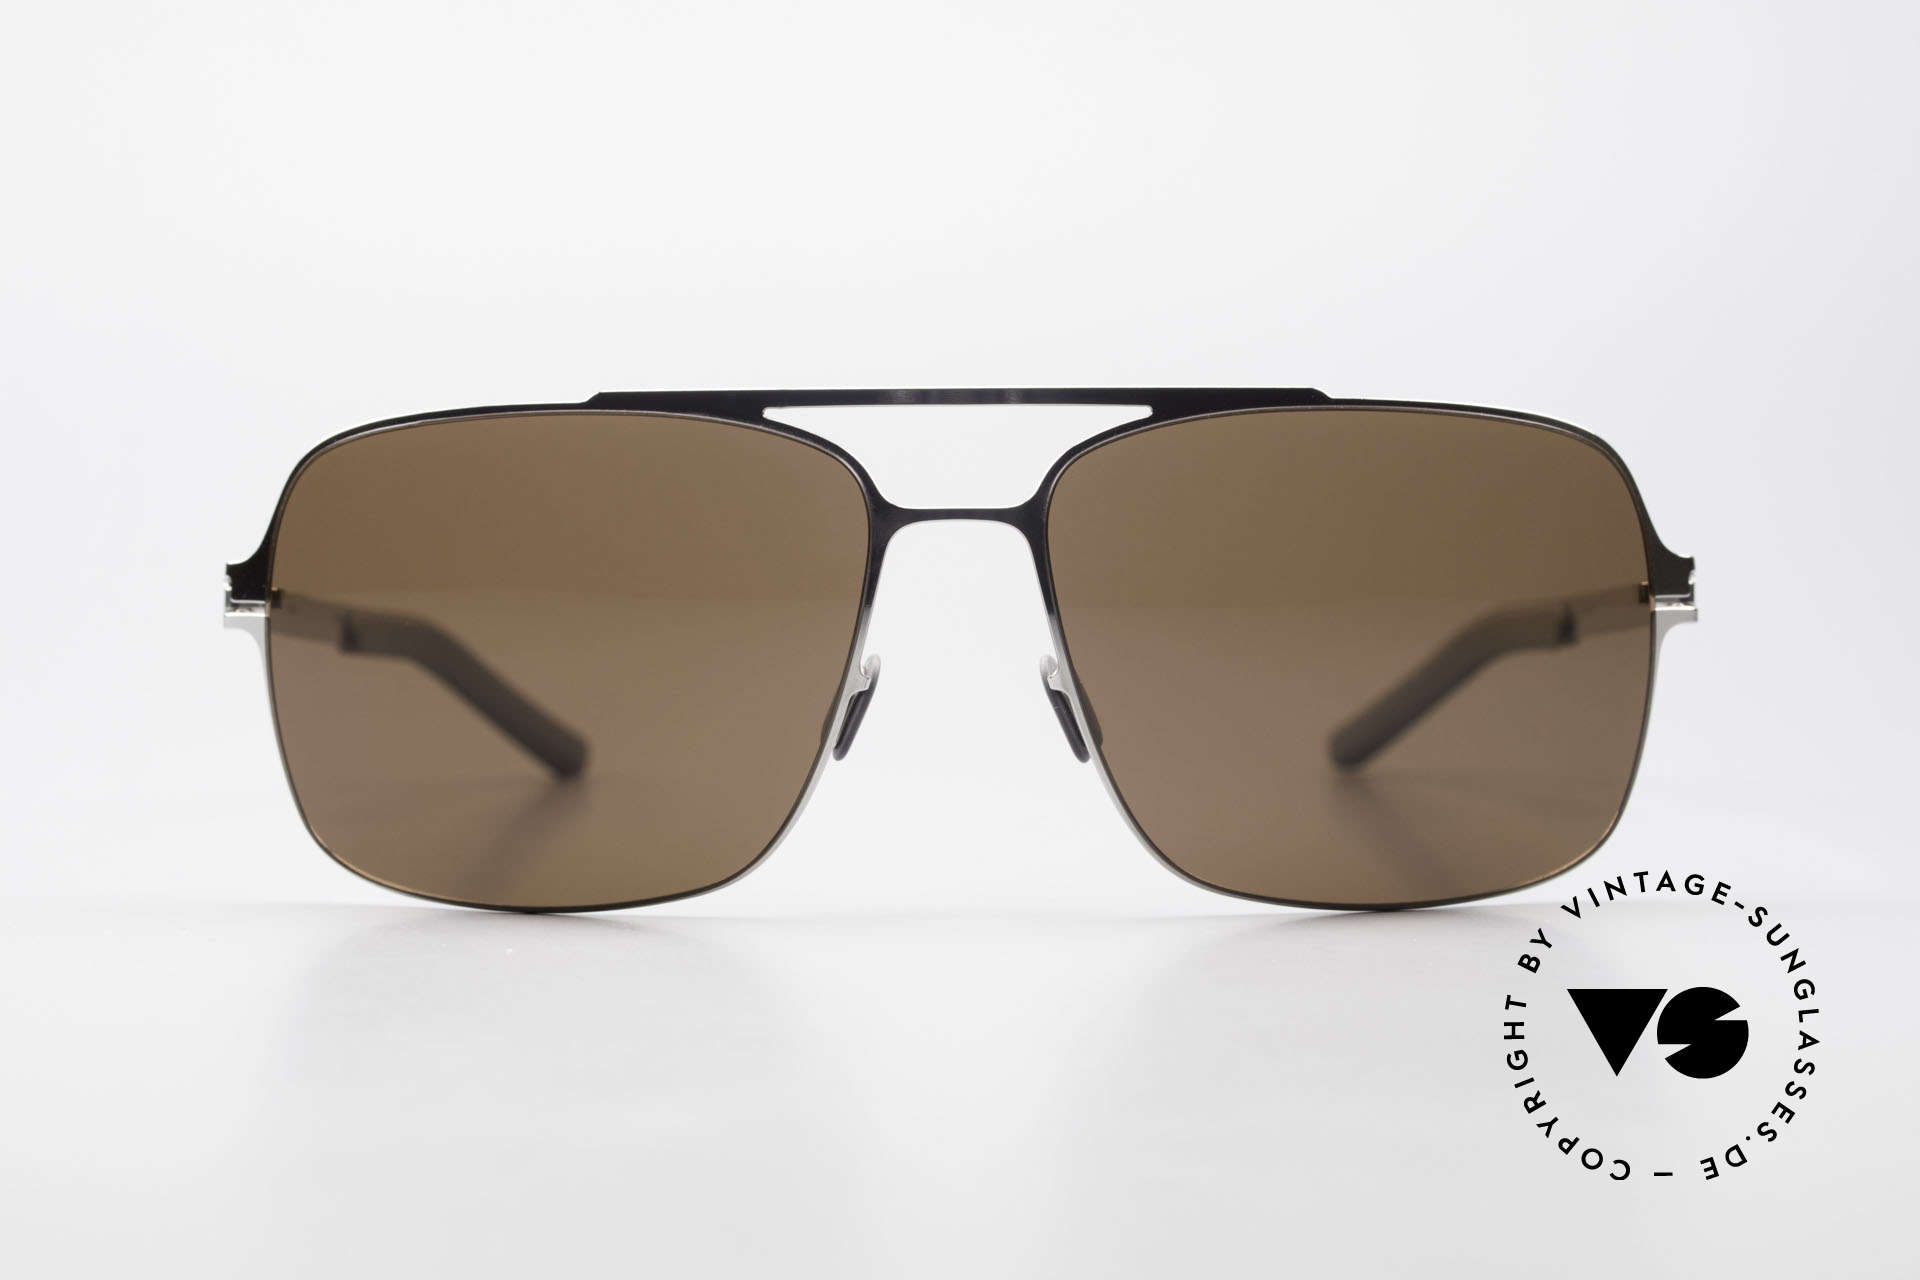 Mykita Troy Collection No 1 Mykita Shades, MYKITA: the youngest brand in our vintage collection, Made for Men